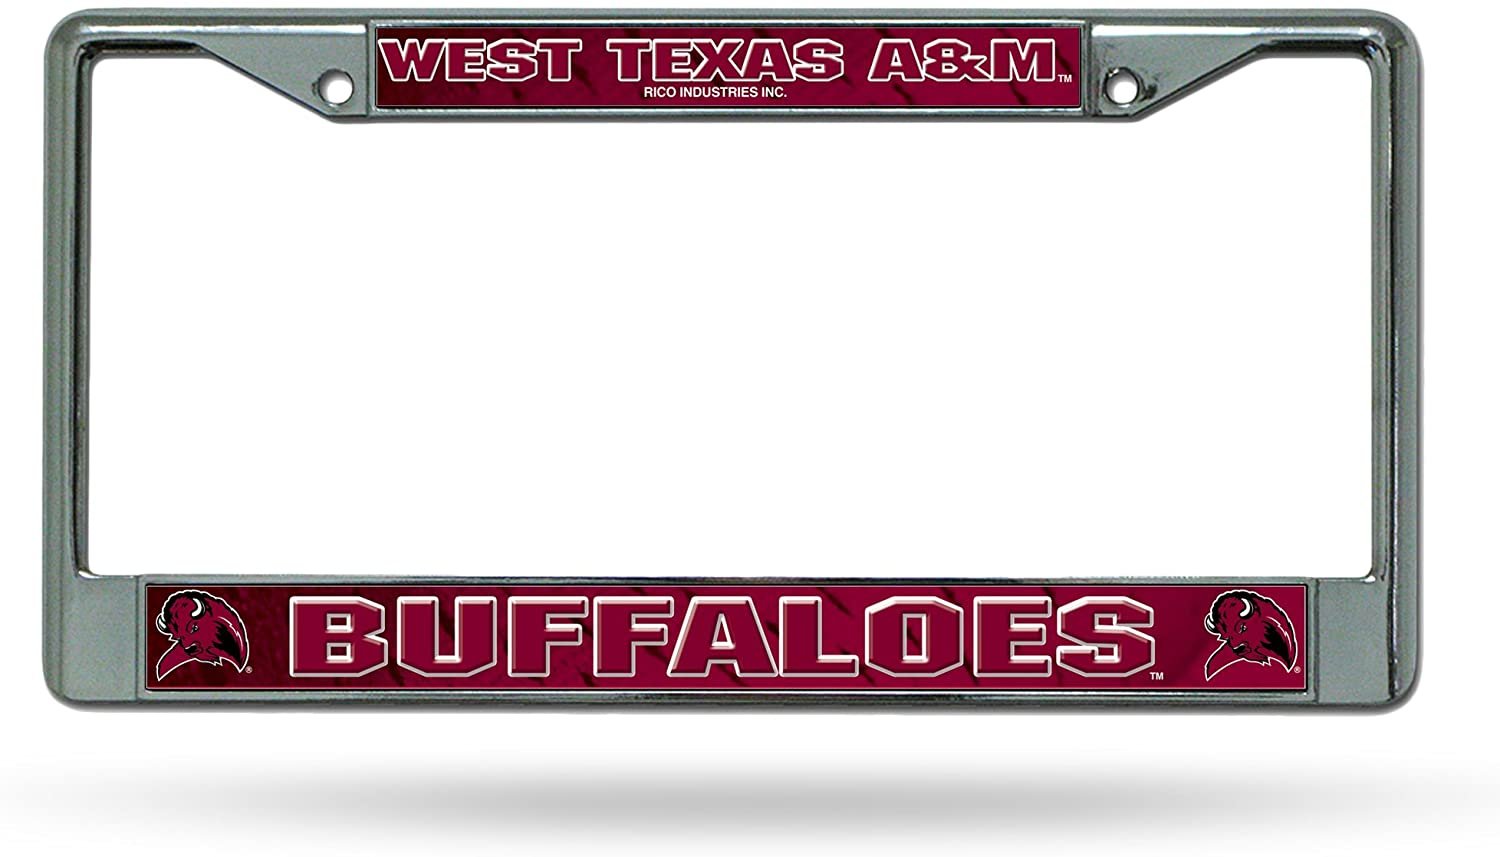 West Texas A&M University Buffaloes Premium Metal License Plate Frame Chrome Tag Cover, 12x6 Inch